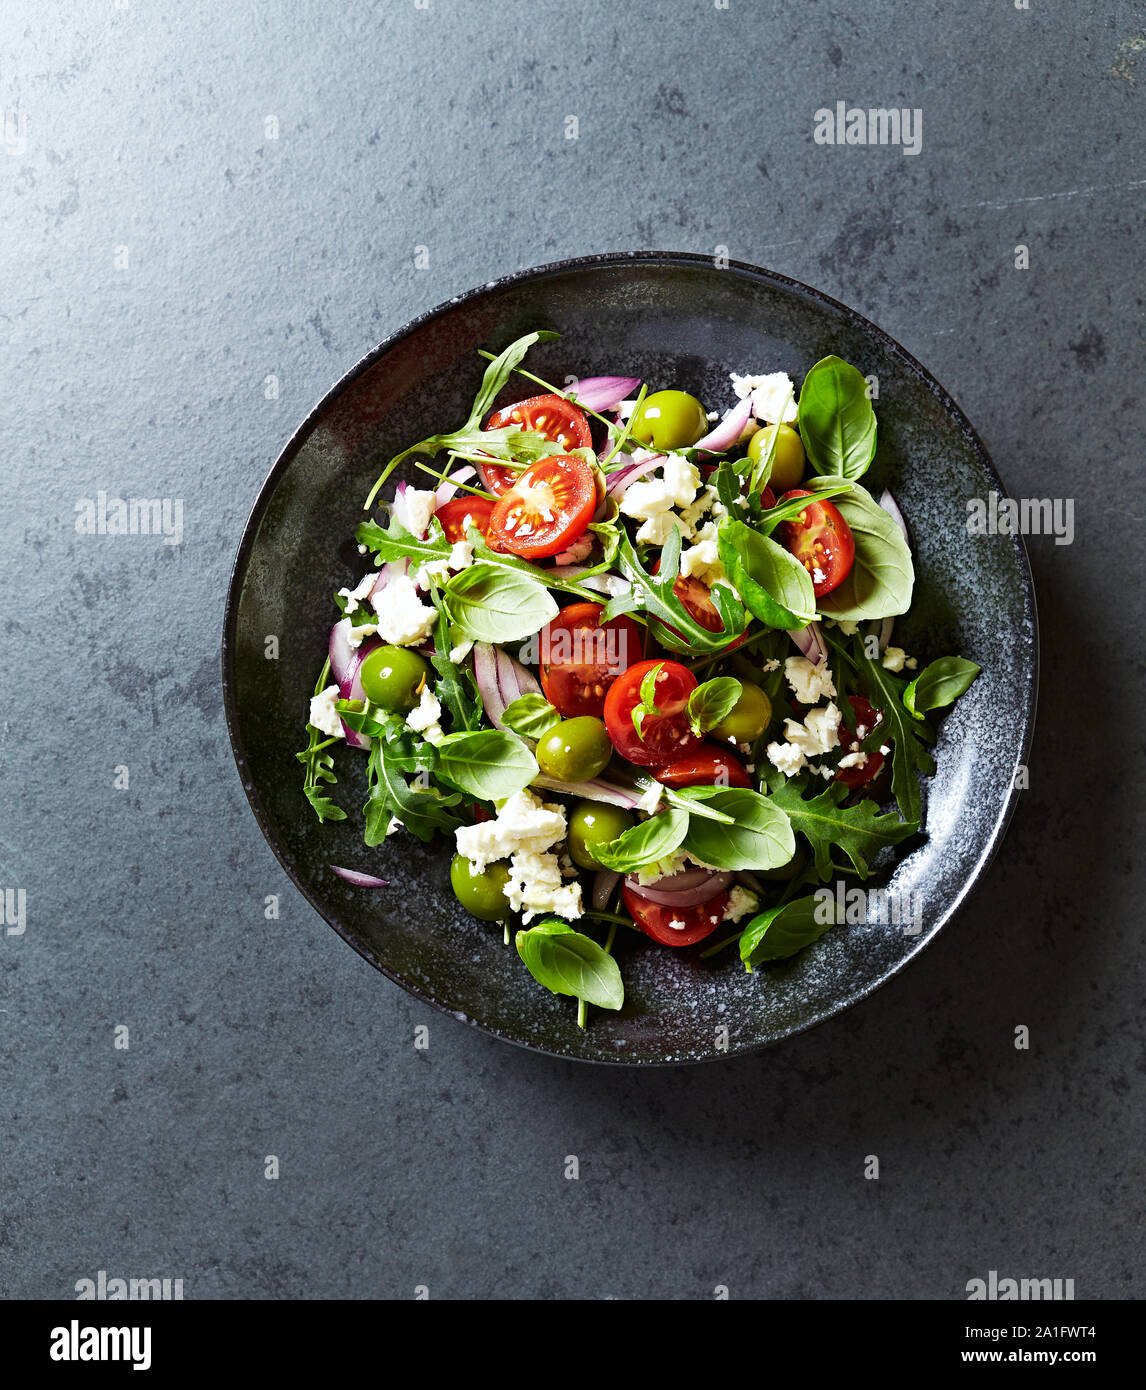 Greek Salad with Cucumeber, Kalamata Olives, Feta Cheese, Cherry Tomatoes, Red Onion and Fresh Basil. Stock Photo